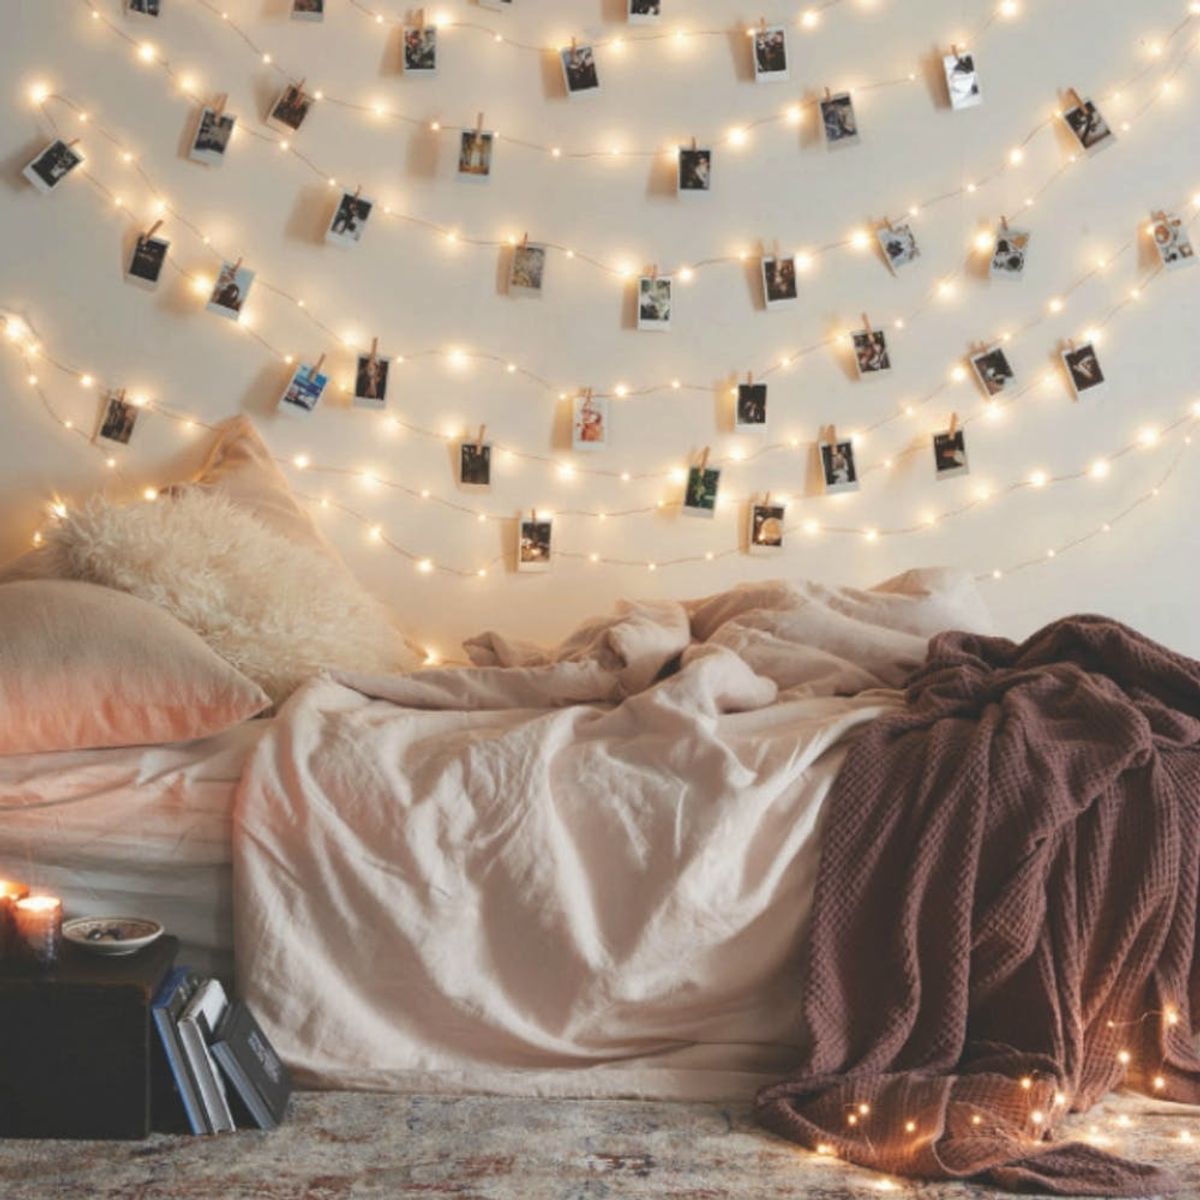 18 Ways to Bring the Cozy Pinterest *Hygge* Trend into Your Home This Winter